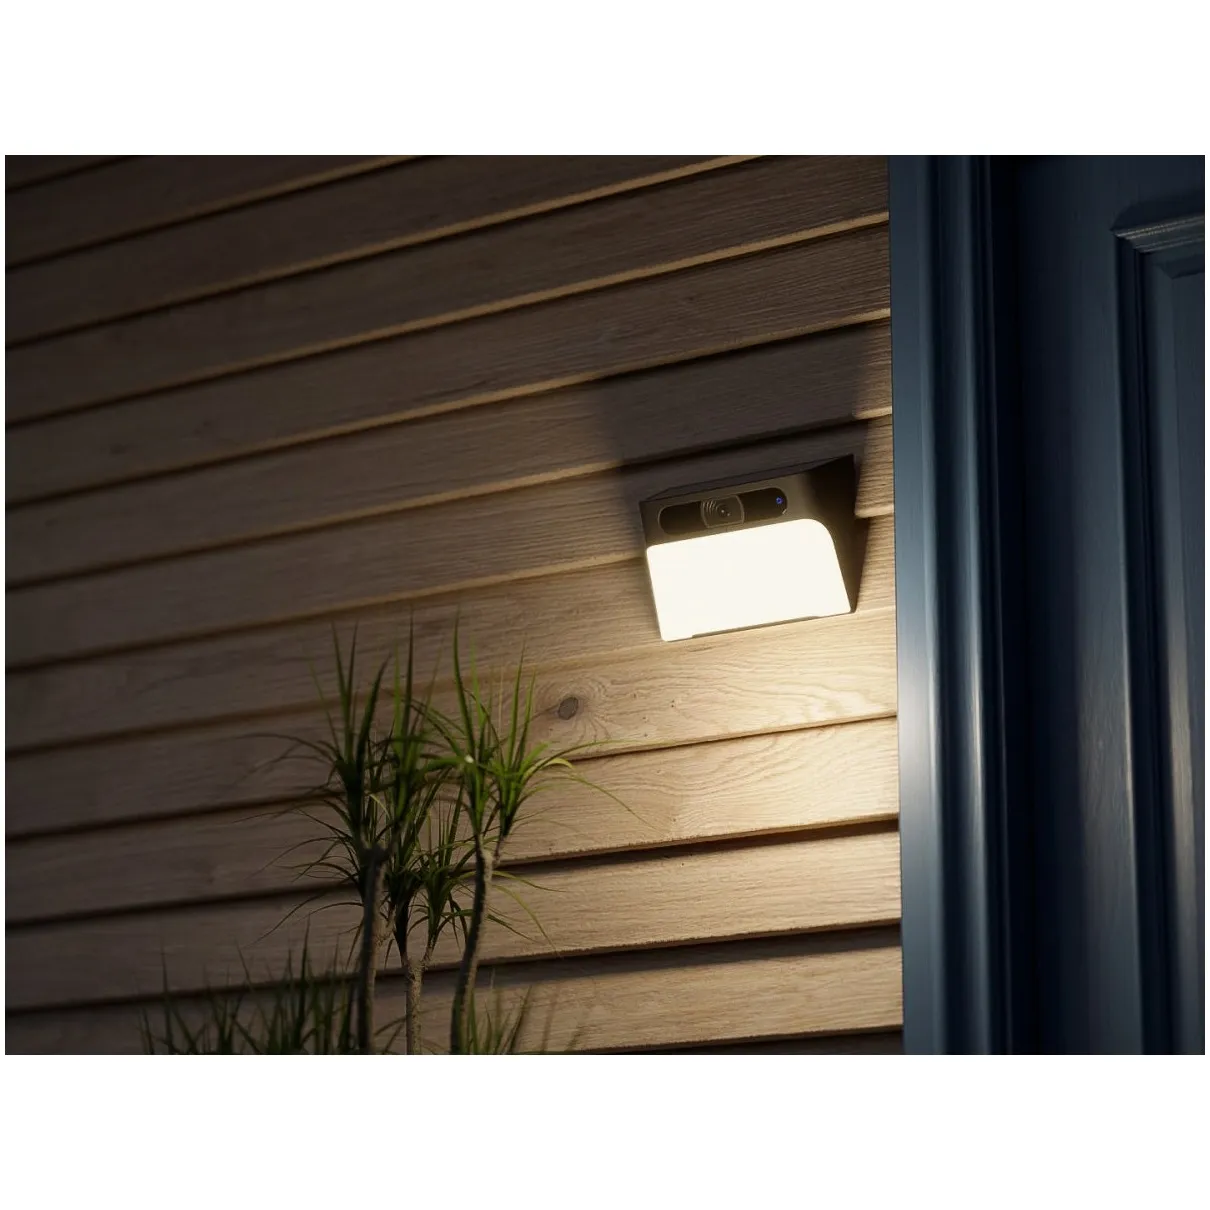 Anker 2K Battery Wall light Cam with solar panel